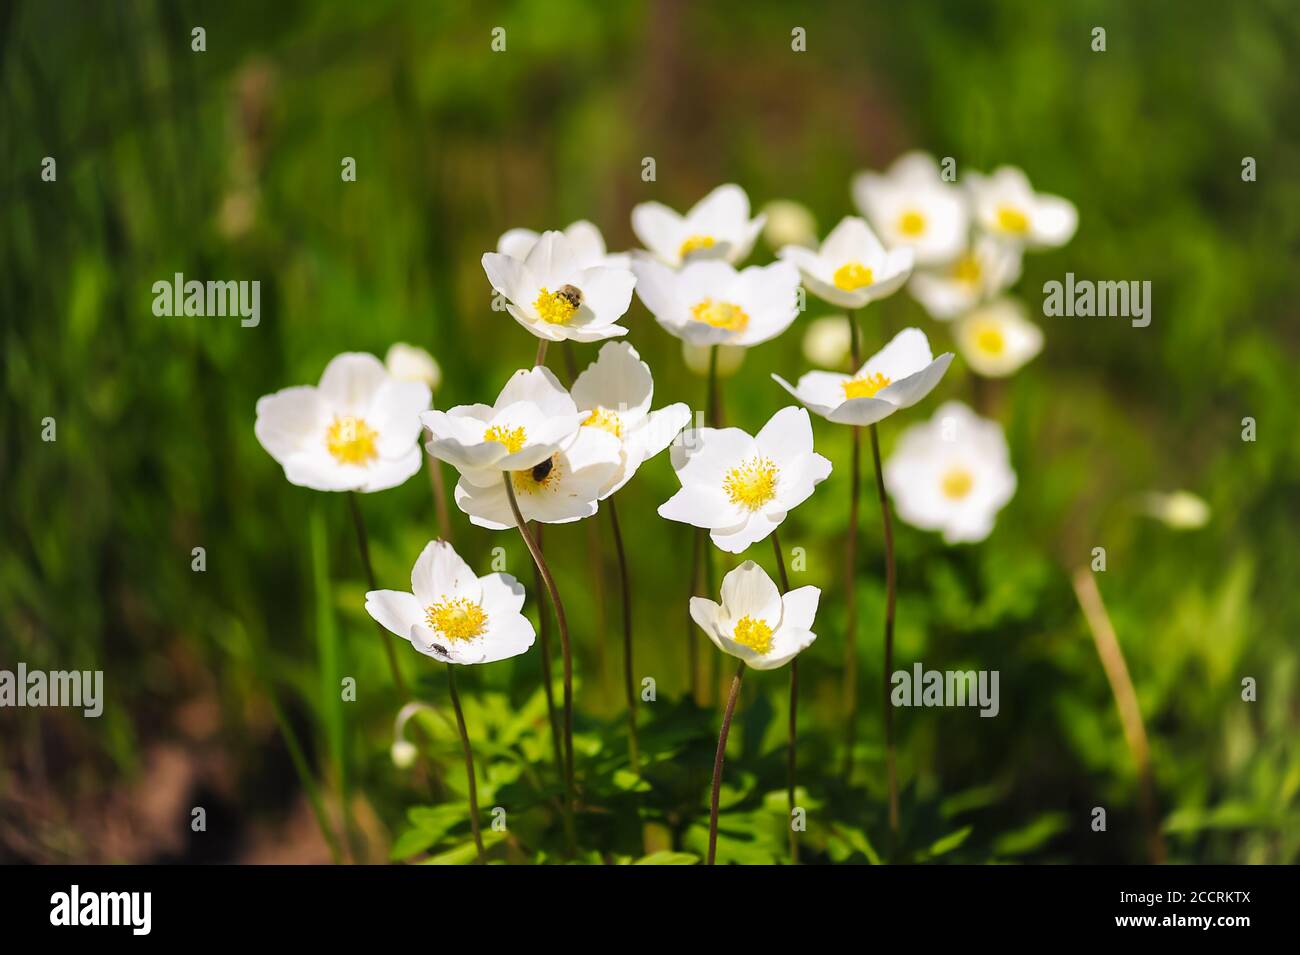 Small White Flowers Grow In The Flowerbed Garden Design Beautiful Landscape On A Summer Day Stock Photo Alamy